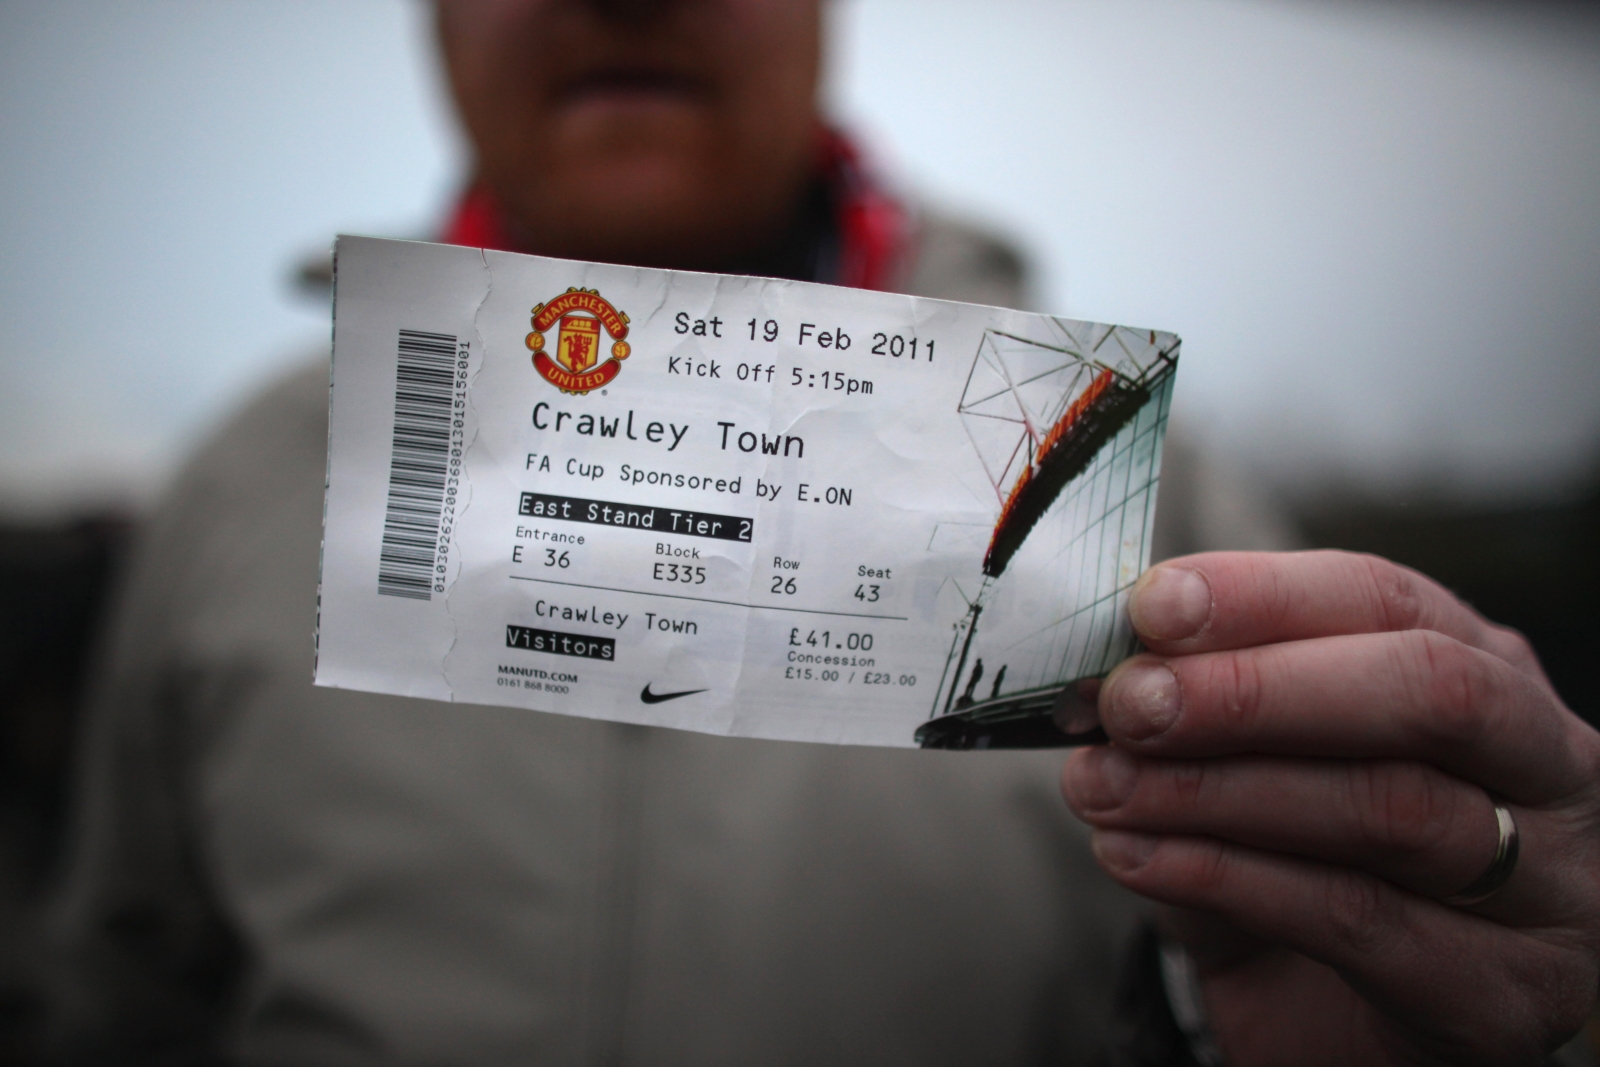 Tickets Manchester United